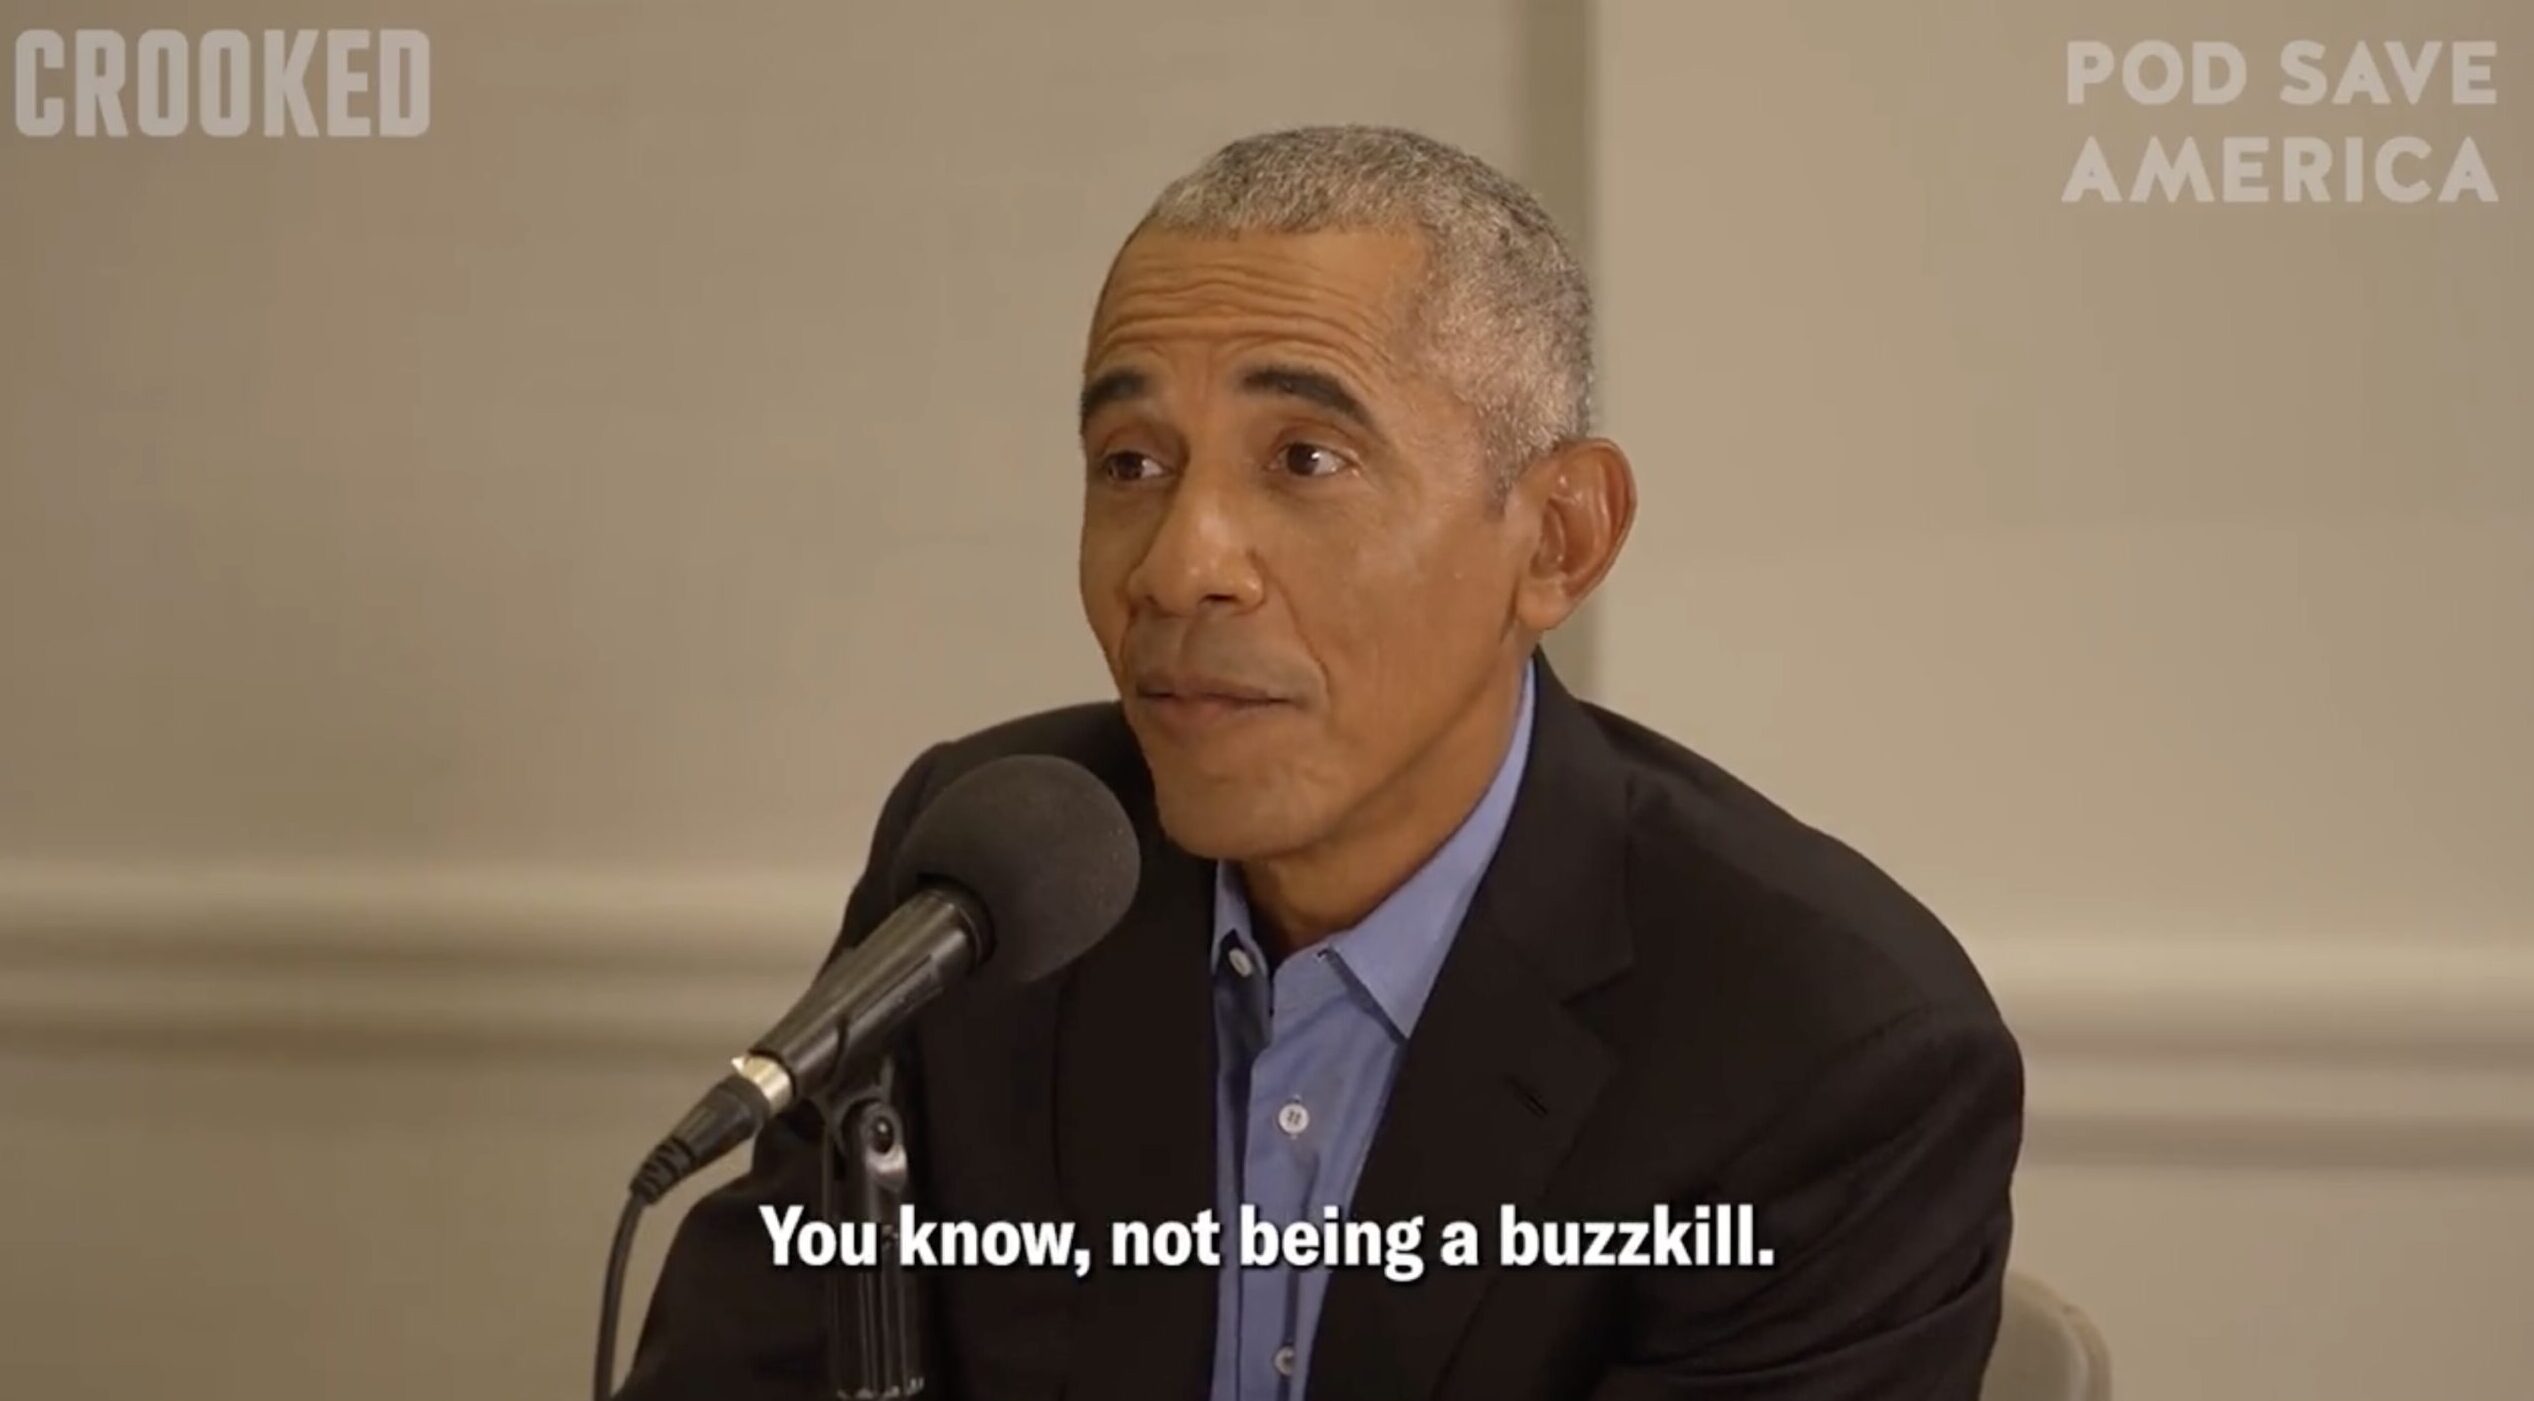 Obama Scolds ‘Buzzkill’ Democrats: People Don’t Want to Feel Like They’re ‘Walking on Eggshells’